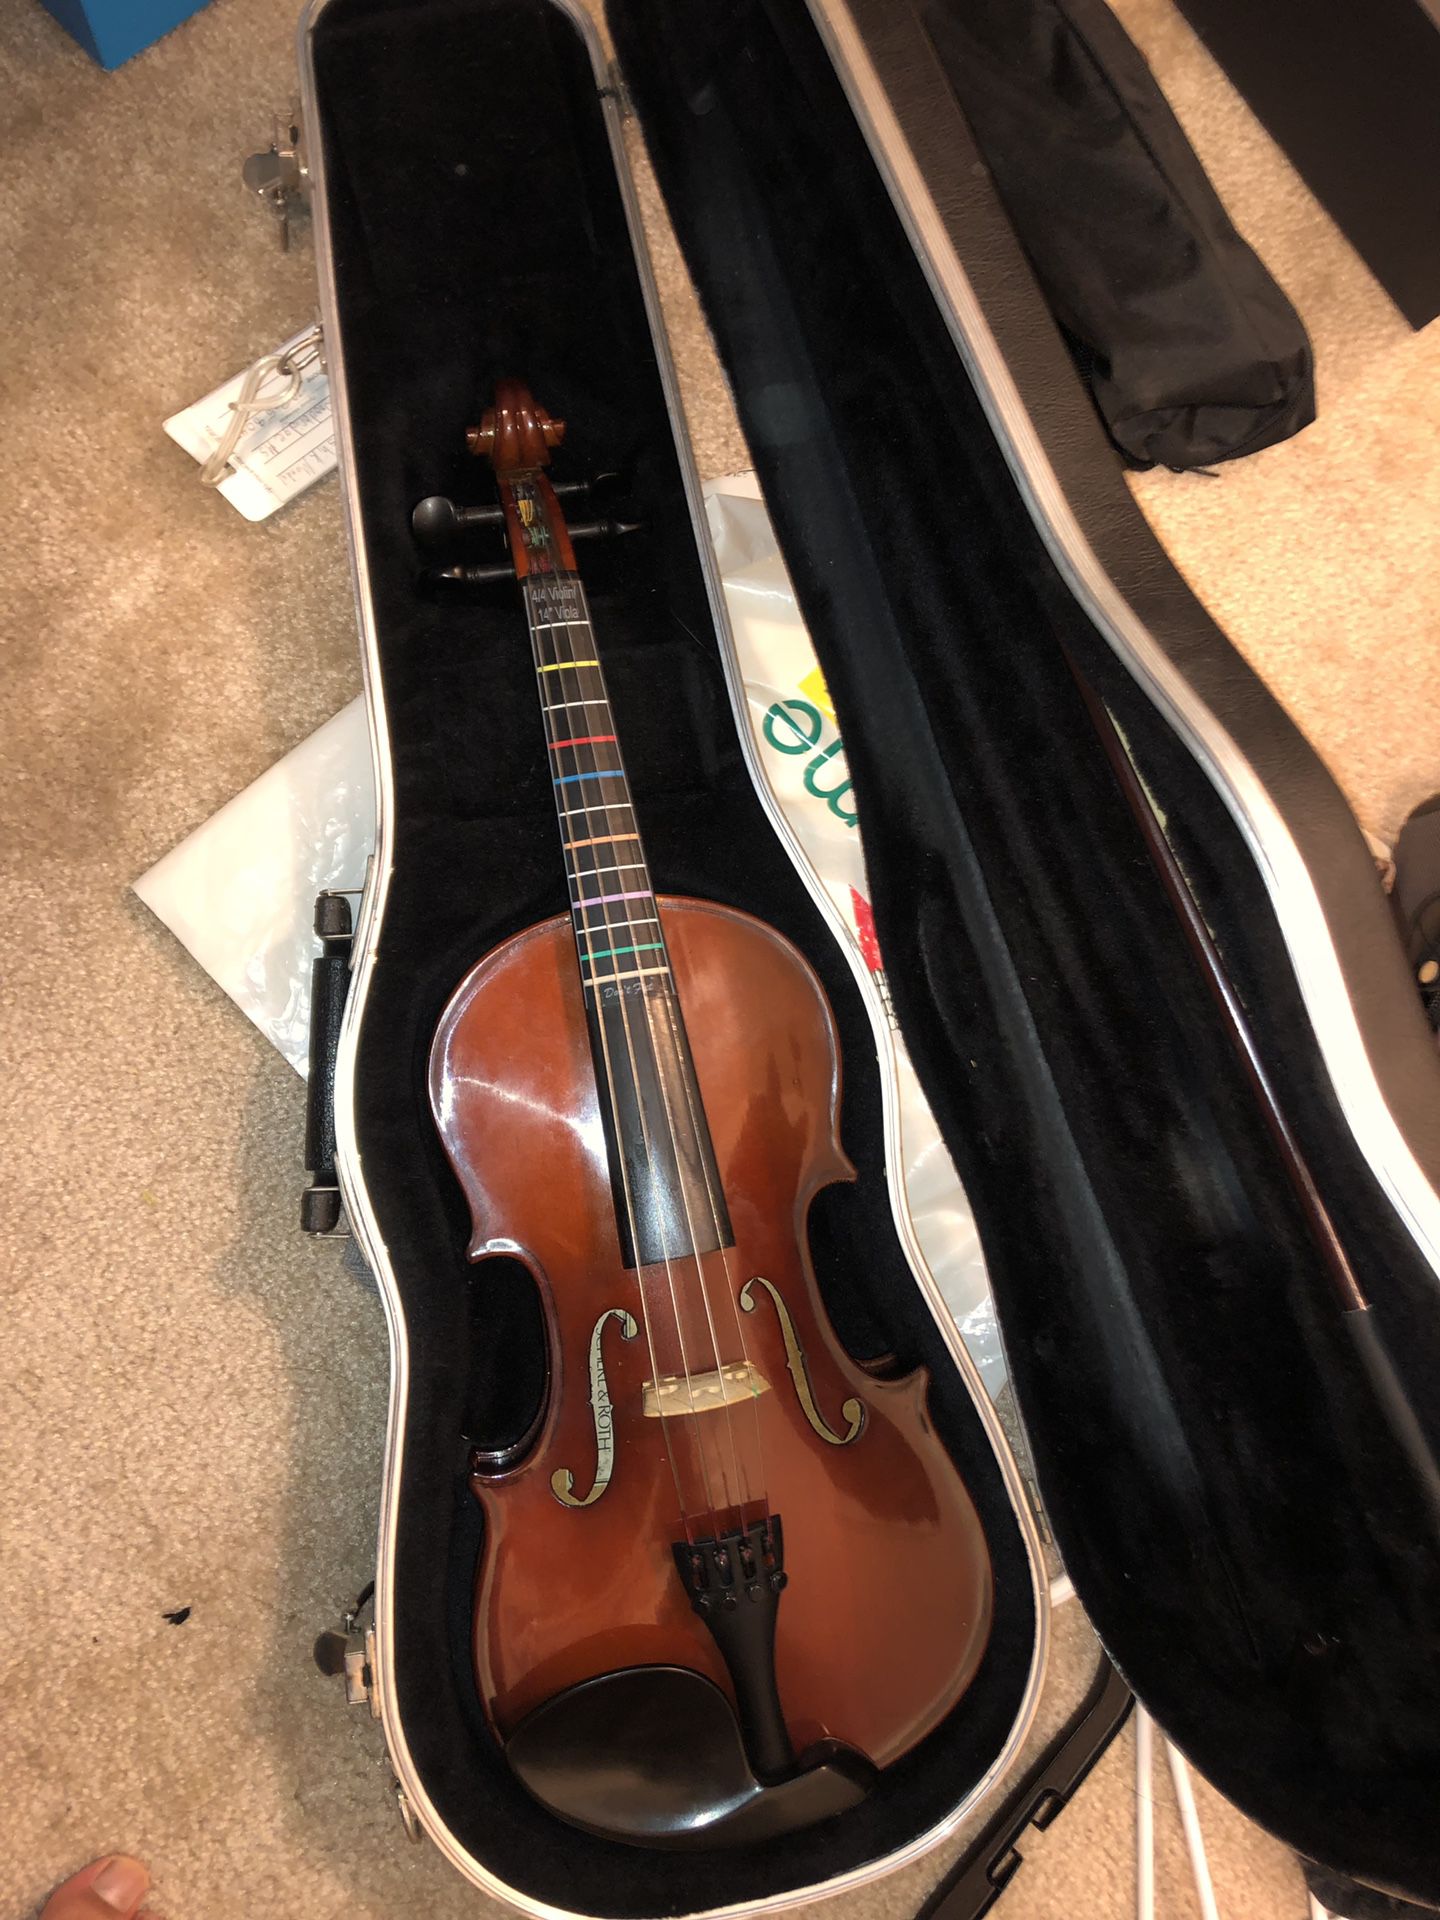 Sherl and Roth full size Violin